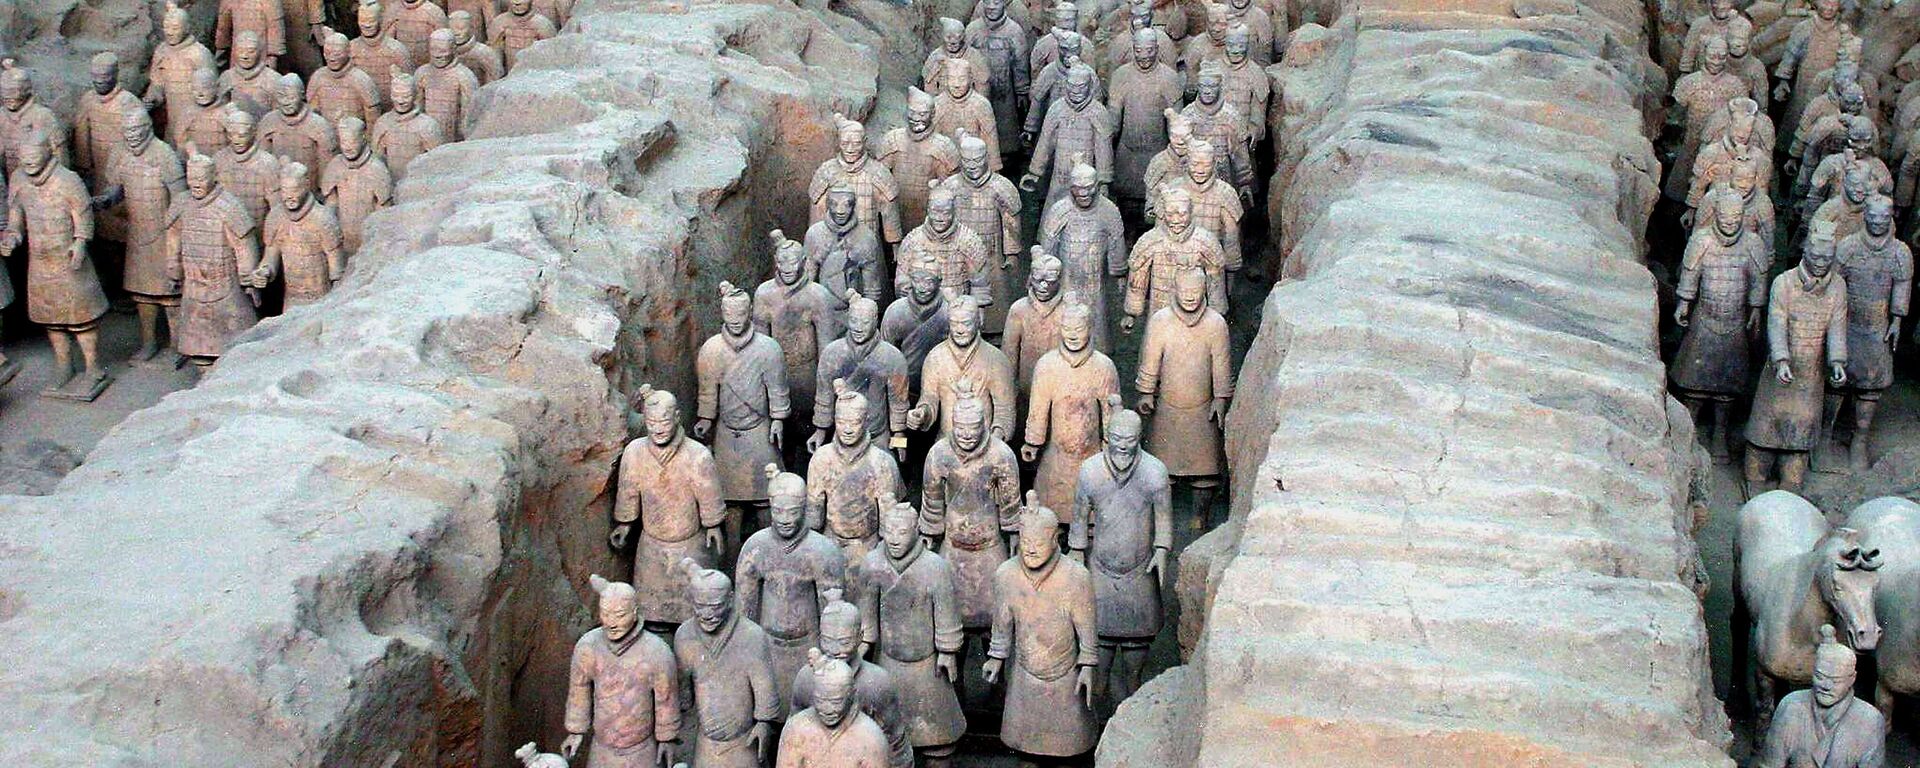 The 2,000-year-old terracotta army at the Qin Terracotta Warriors and Horses Museum, in Xian, central China's Shaanxi province. (File) - Sputnik International, 1920, 25.12.2017